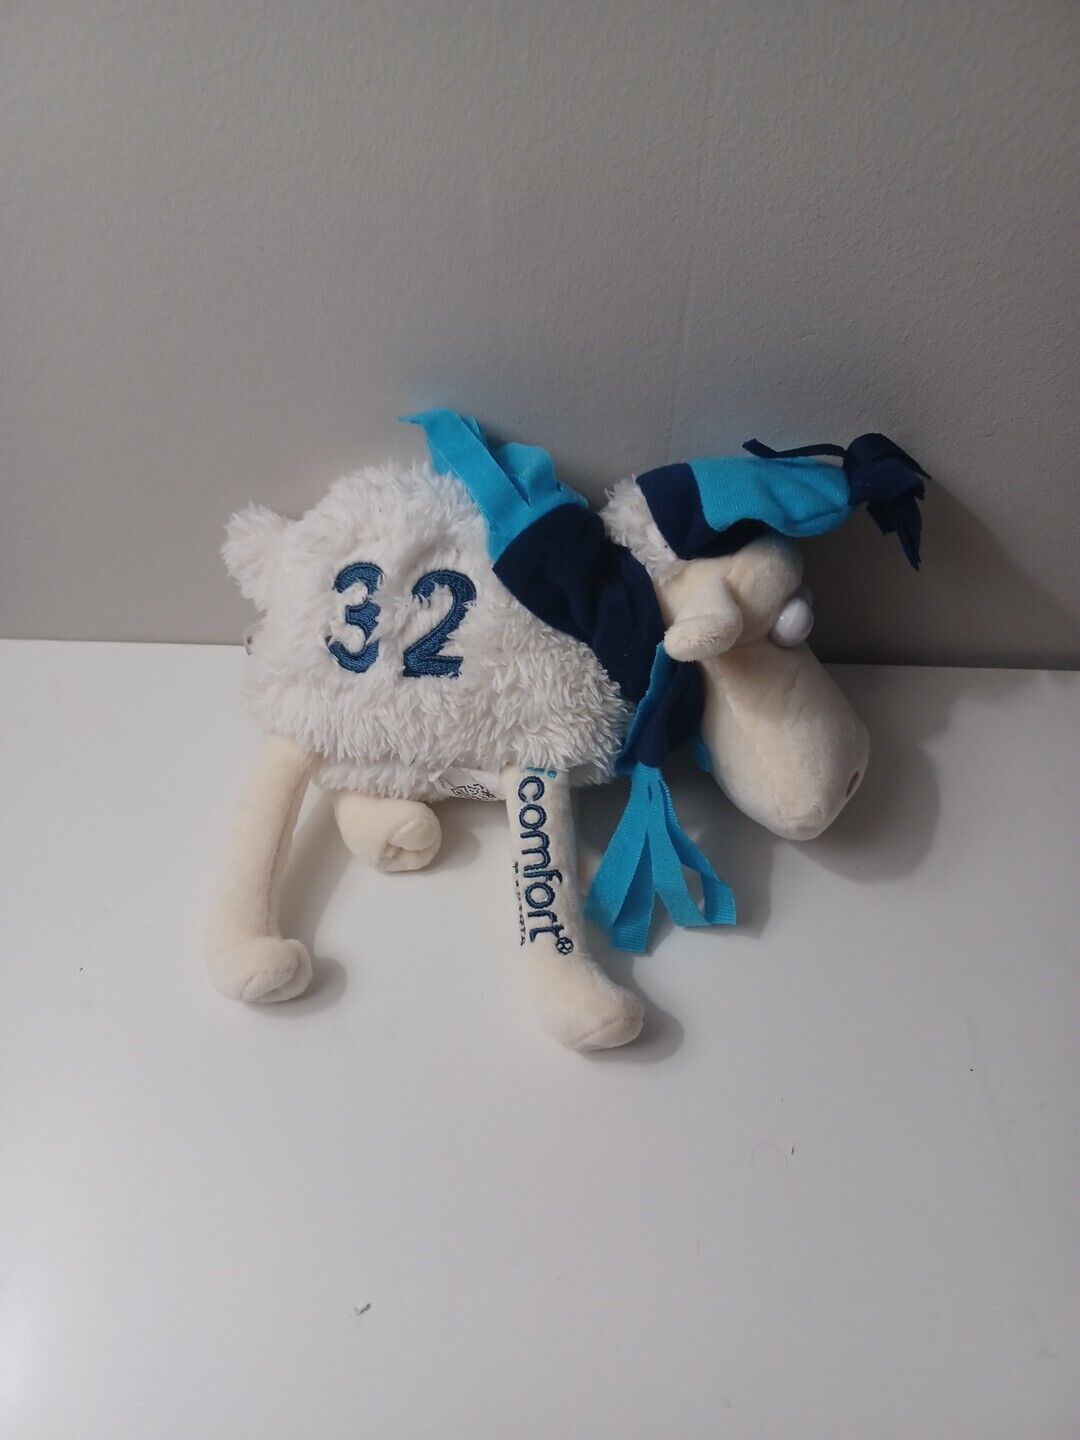 Comfort by SERTA - Counting Sheep #32 Plush Stuffed Animal with Blue Hat & Scarf